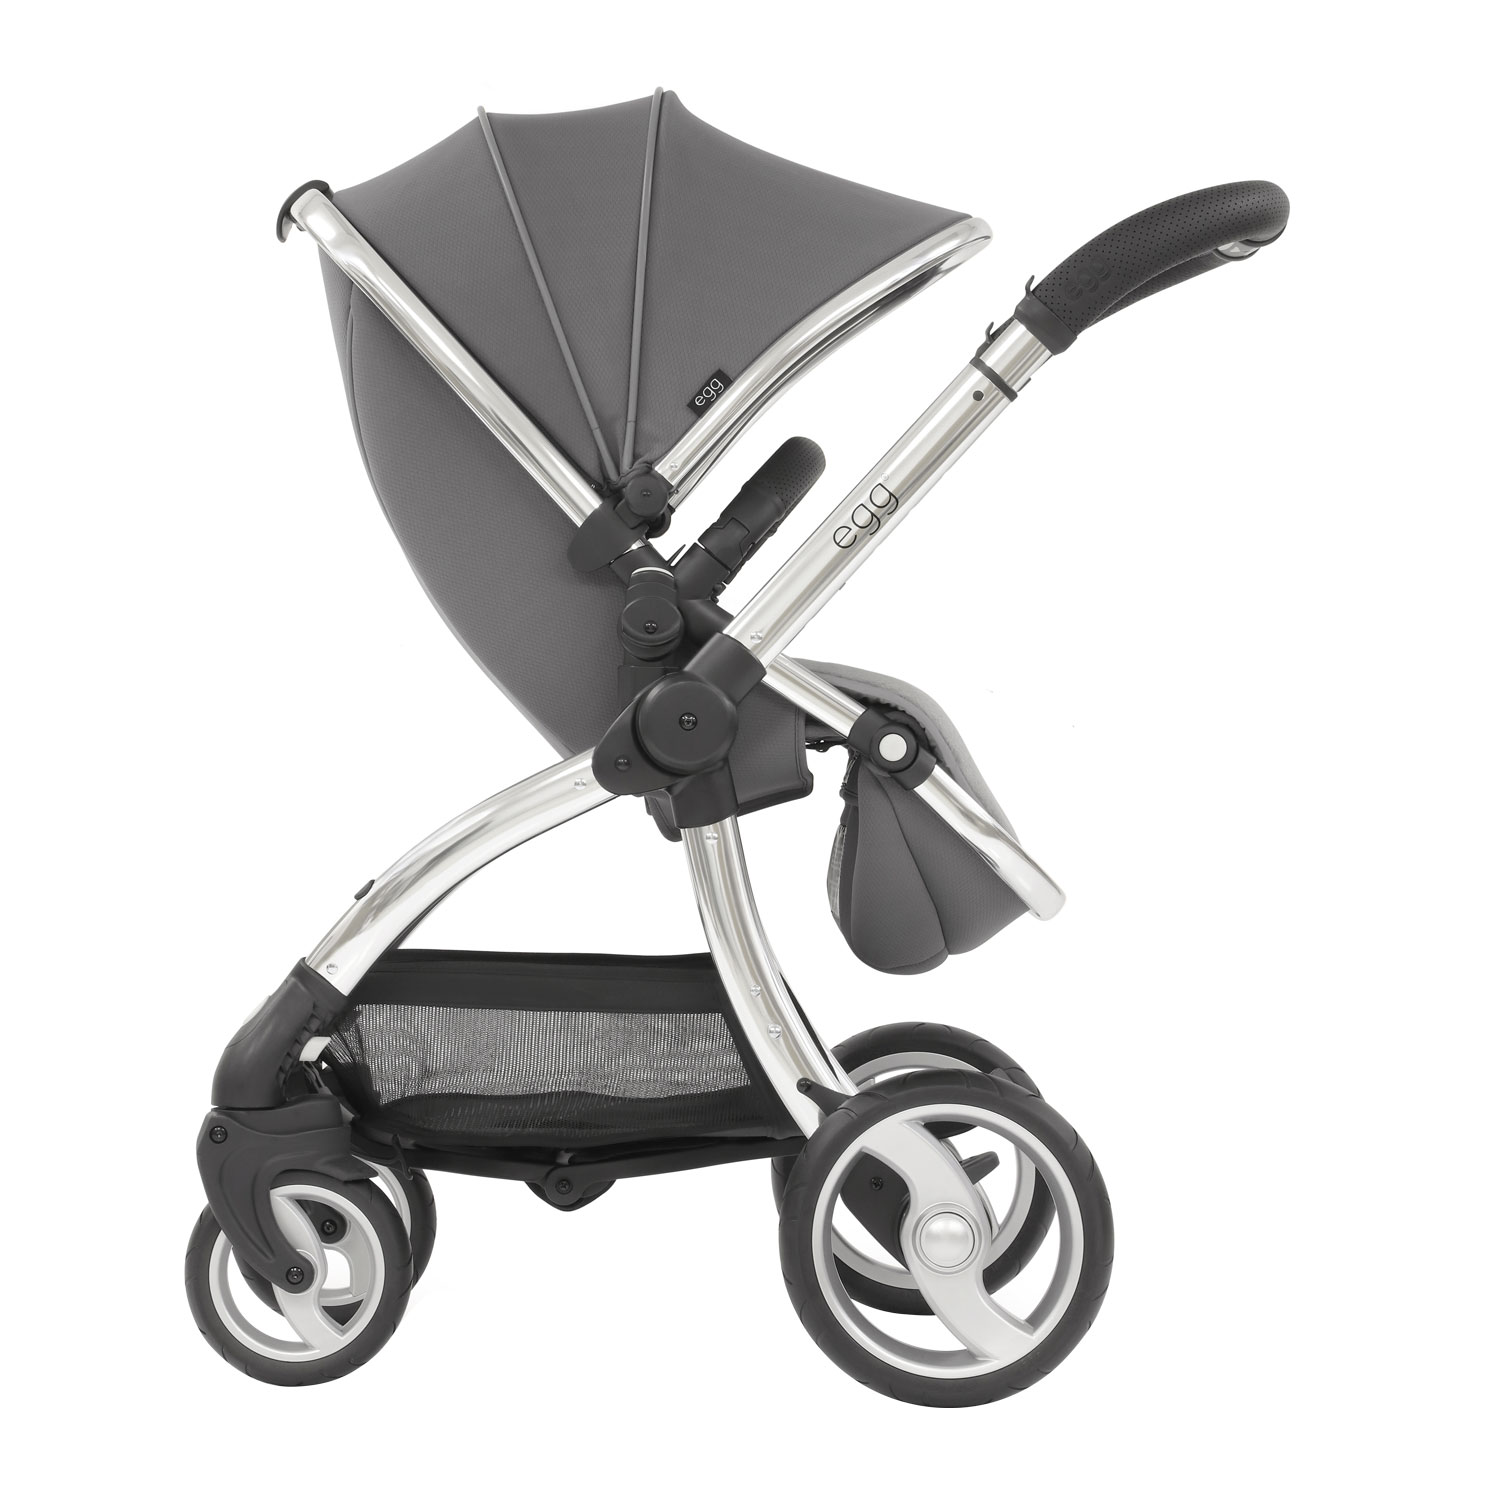 Коляска egg Stroller Anthracite & Chrome Chassis коляска 2 в 1 joolz day awesome anthracite 530060